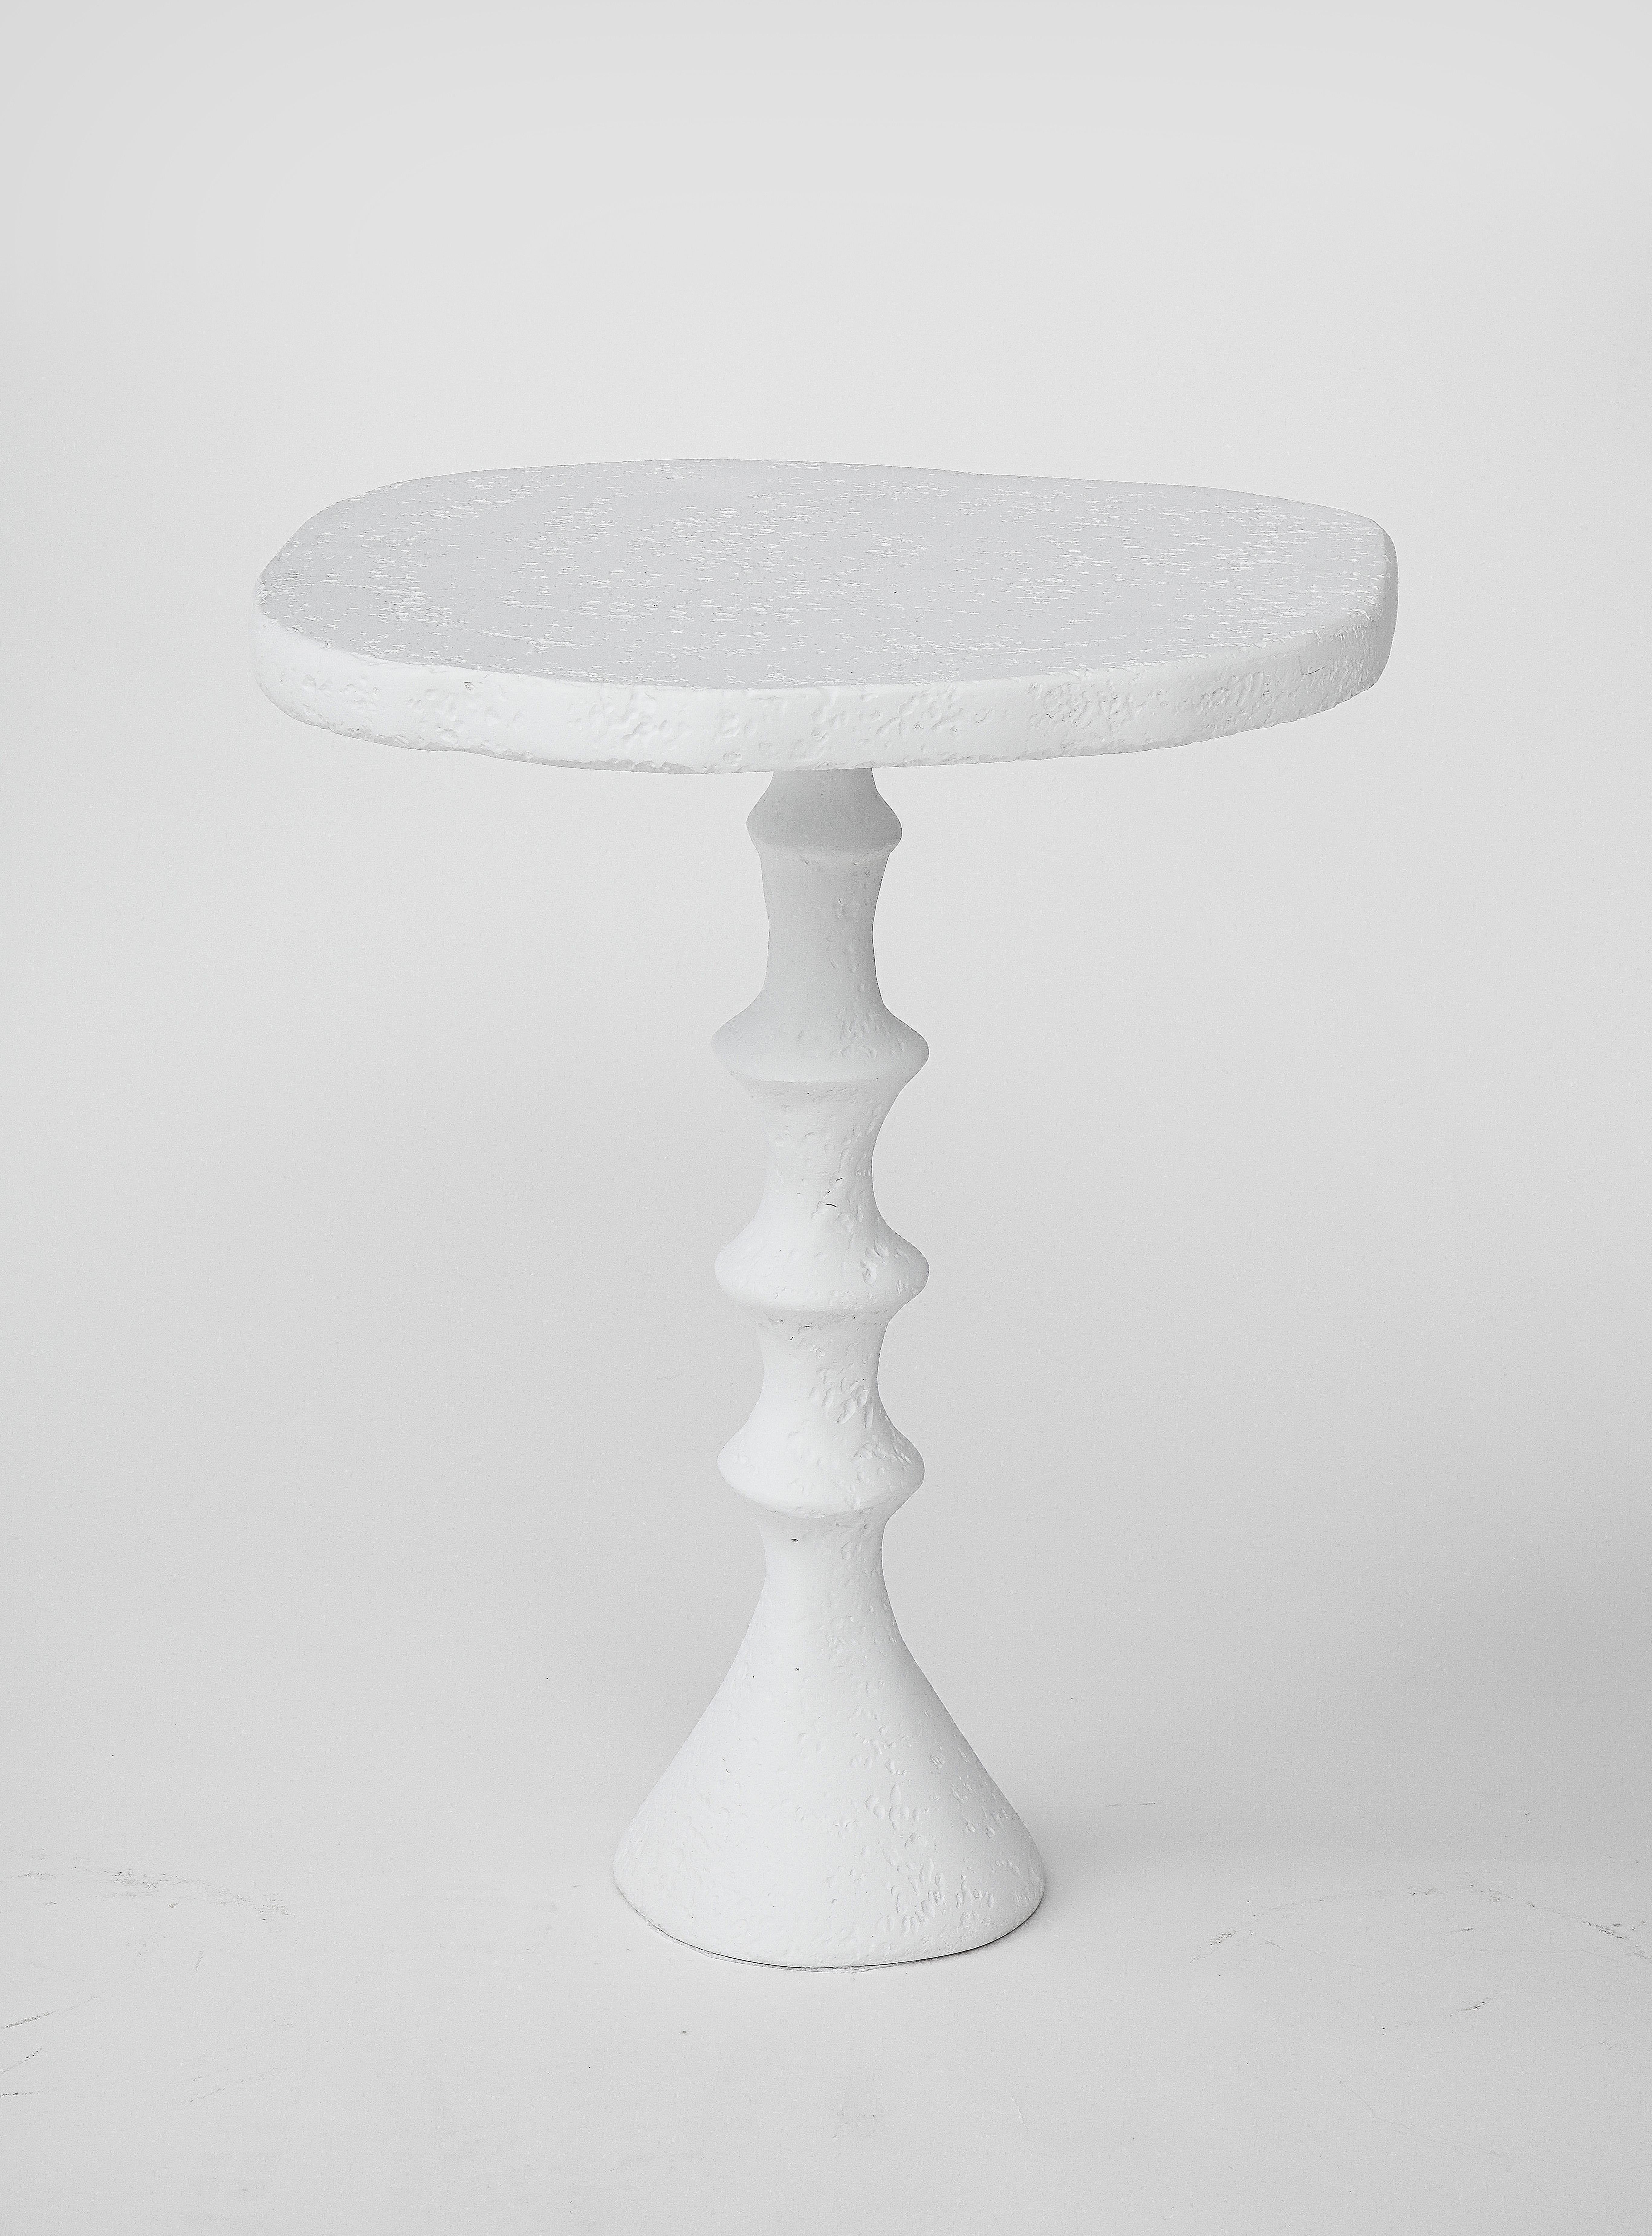 This side table is part of our St. Paul collection. Hand crafted plaster of Paris finish with an organic design. This small scale pedestal side table has our signature plaster of Paris finish which we use on our furniture and lighting collection.